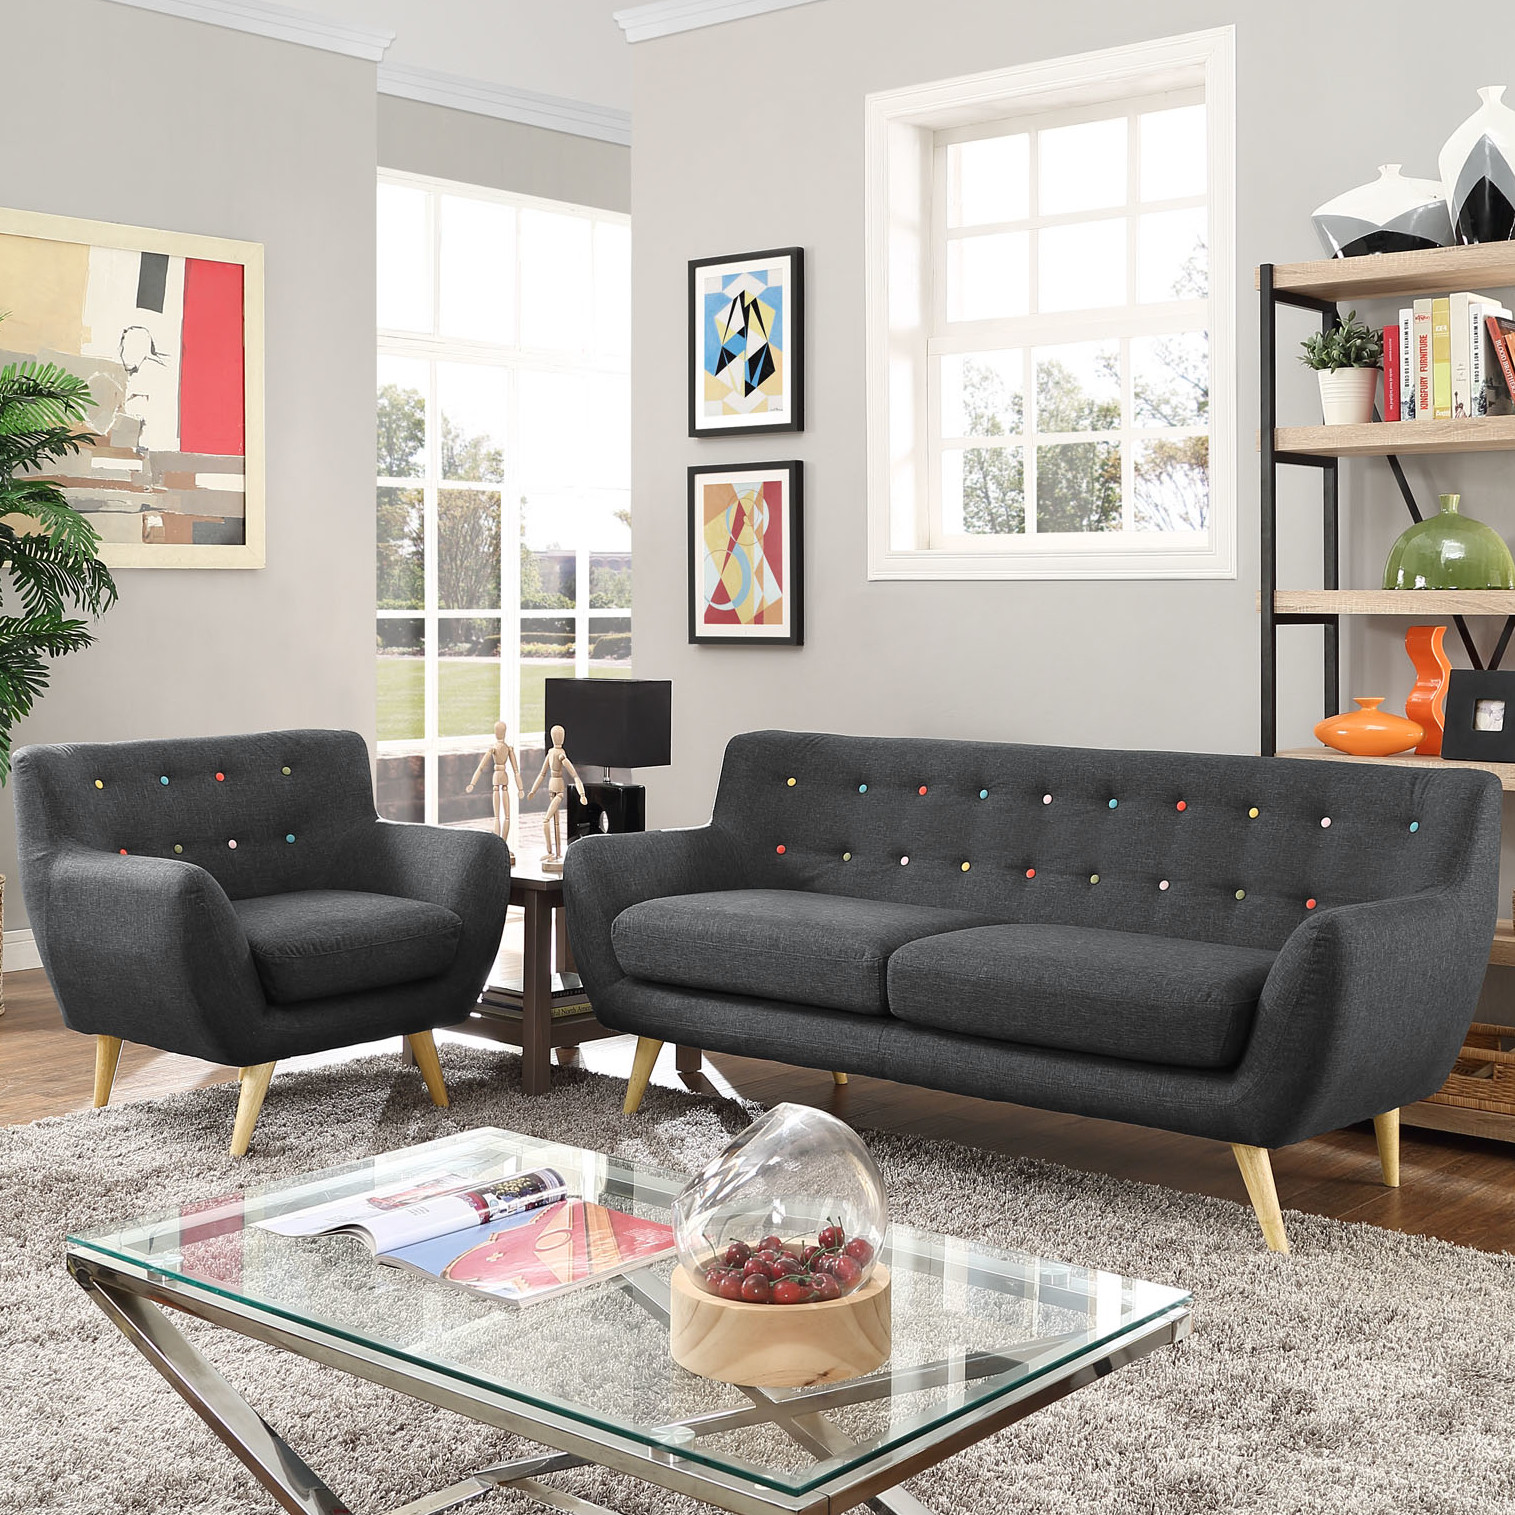 Cheap Modern Living Room Furniture
 11 Clever Tricks of How to Improve Cheap Living Room